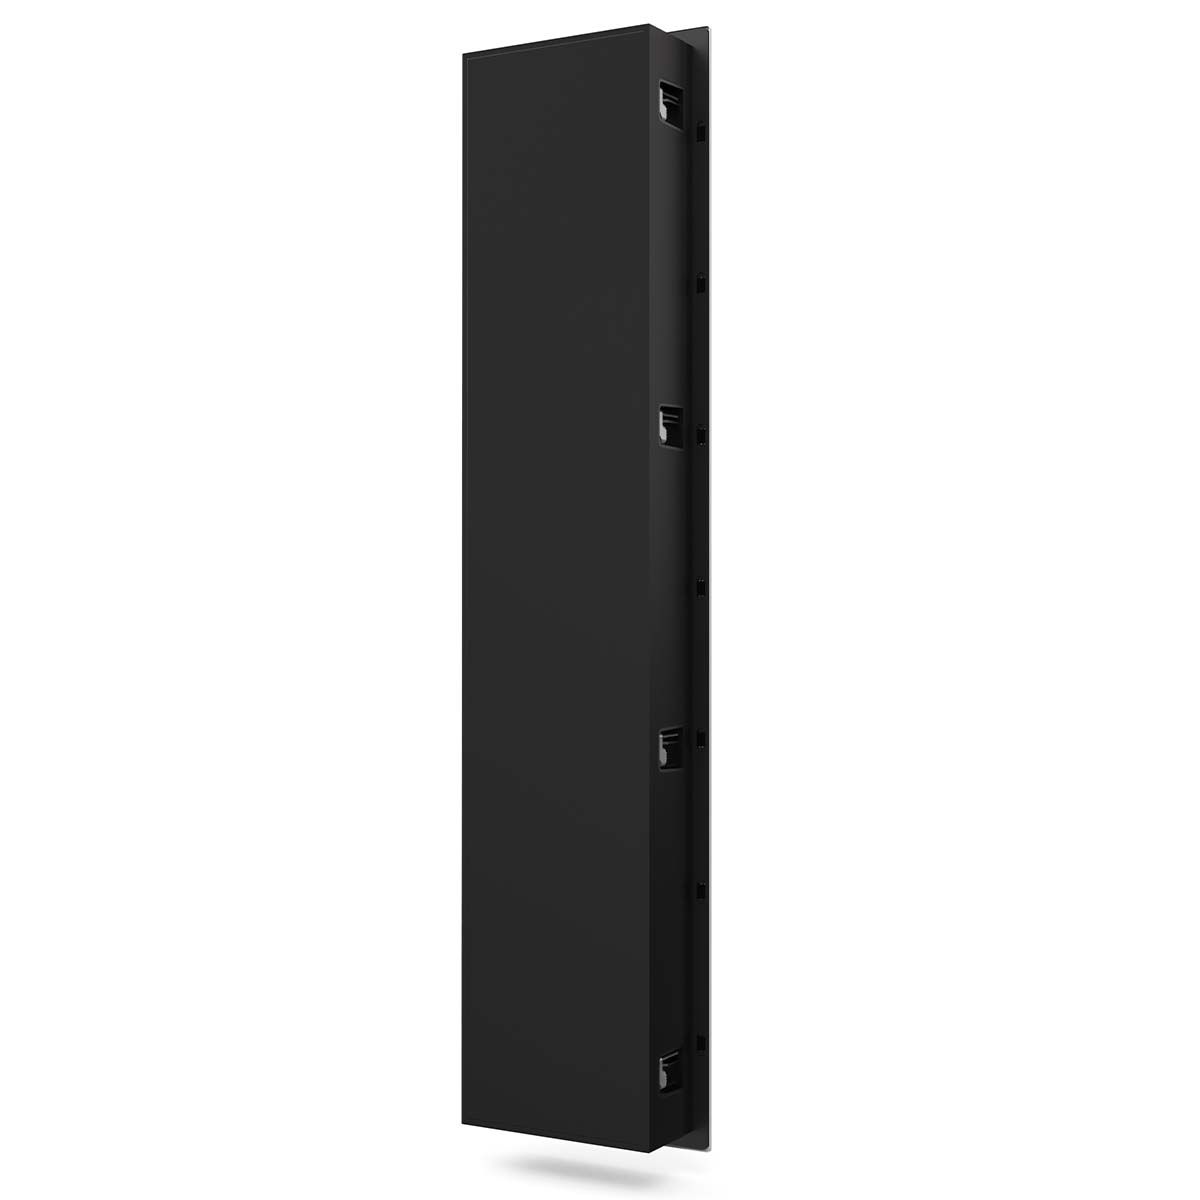 Rear view of MartinLogan Monument 7XW in-wall speaker